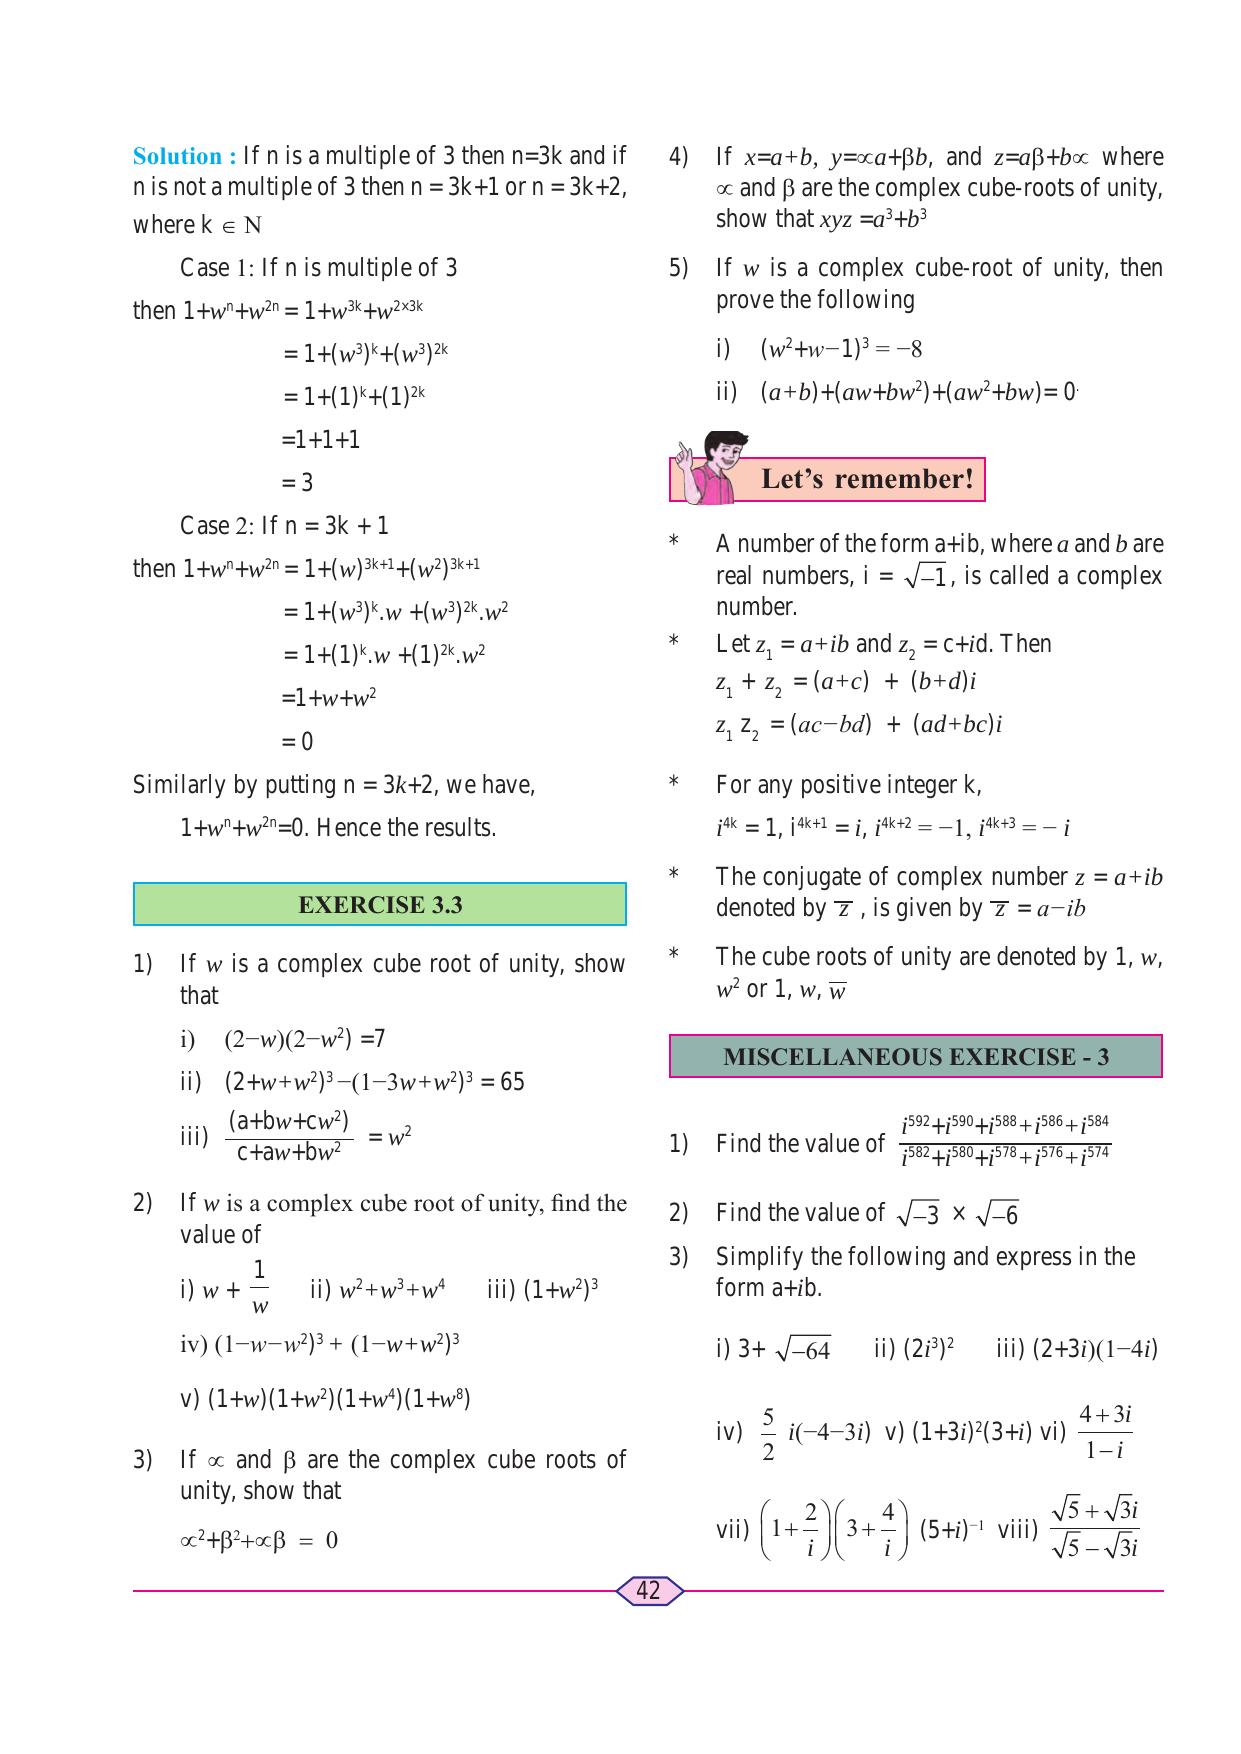 Maharashtra Board Class 11 Maths (Commerce) (Part 1) Textbook - Page 52